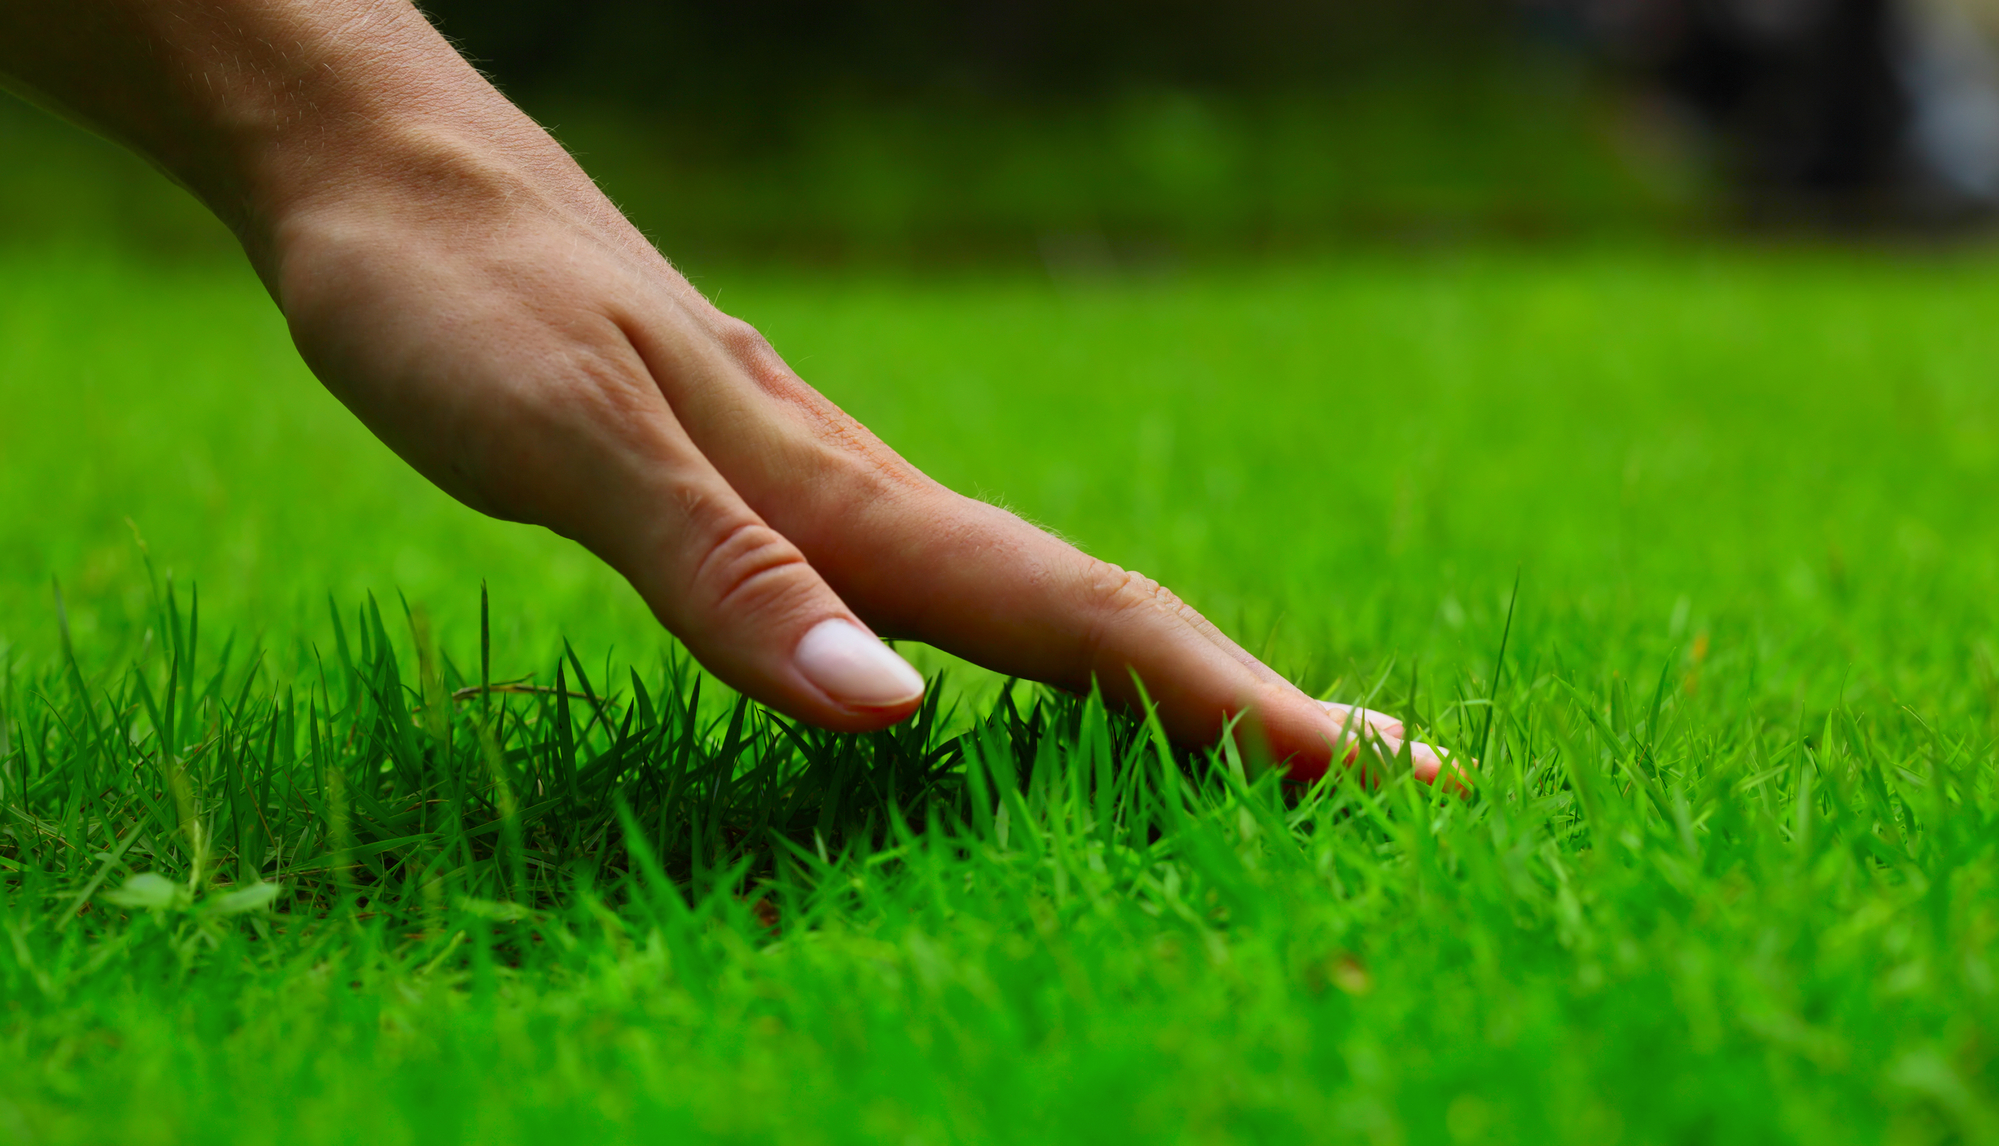 Hand on a lawn